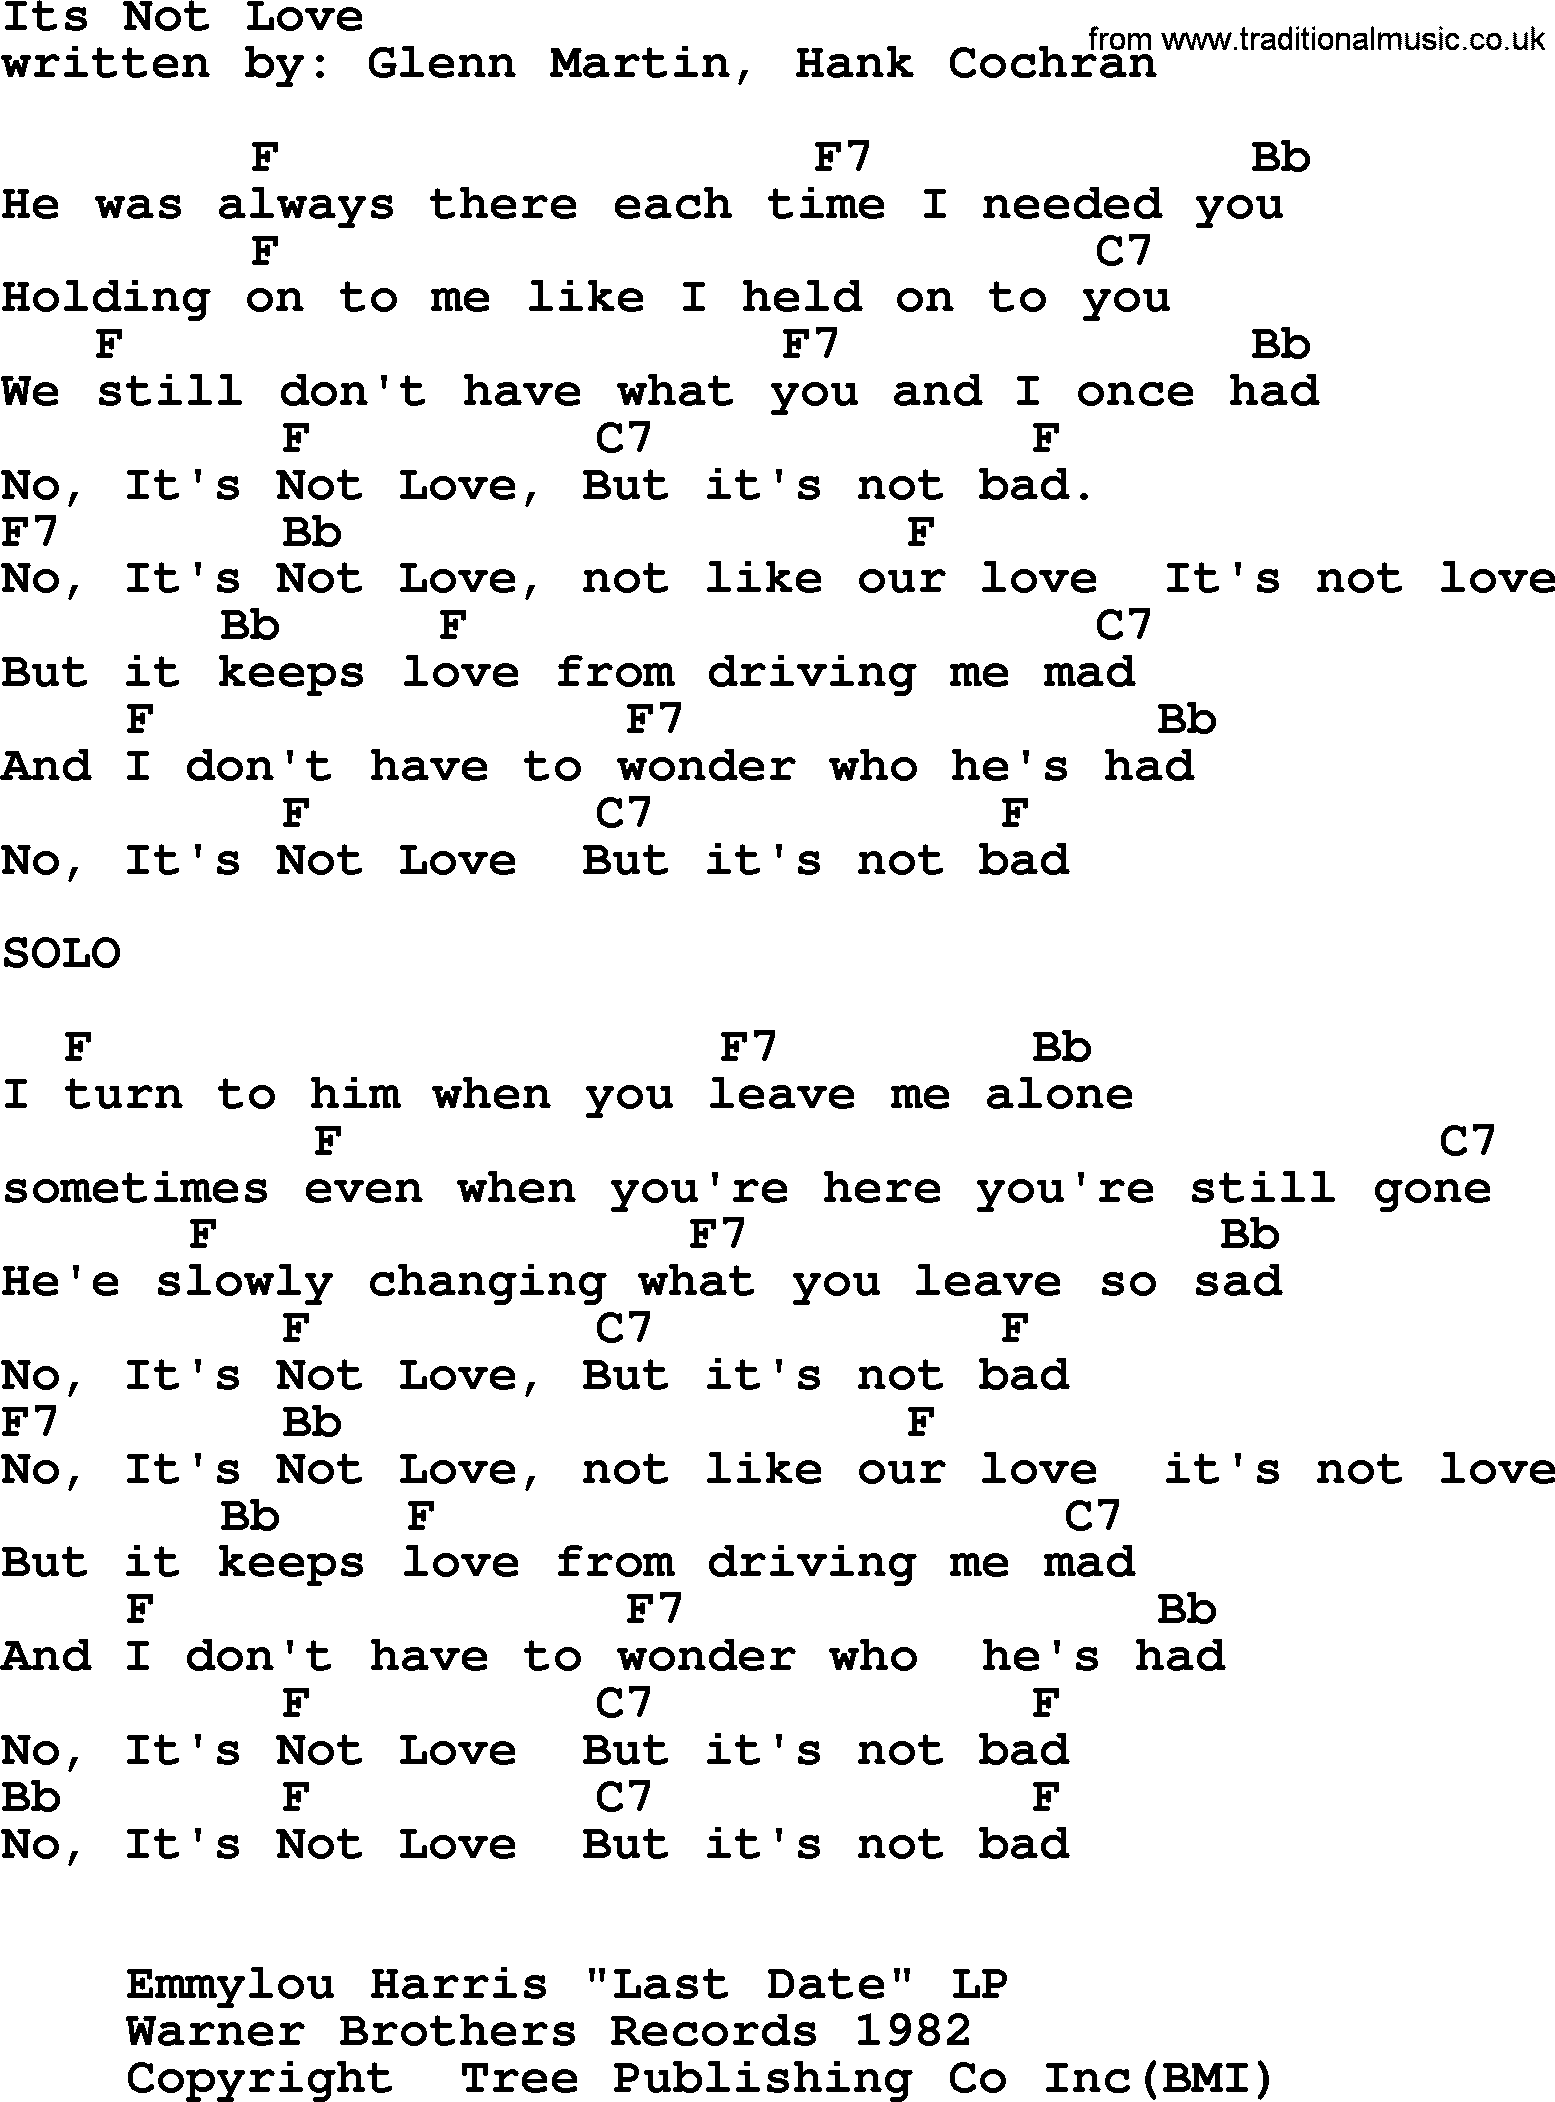 Emmylou Harris Song Its Not Love Lyrics And Chords